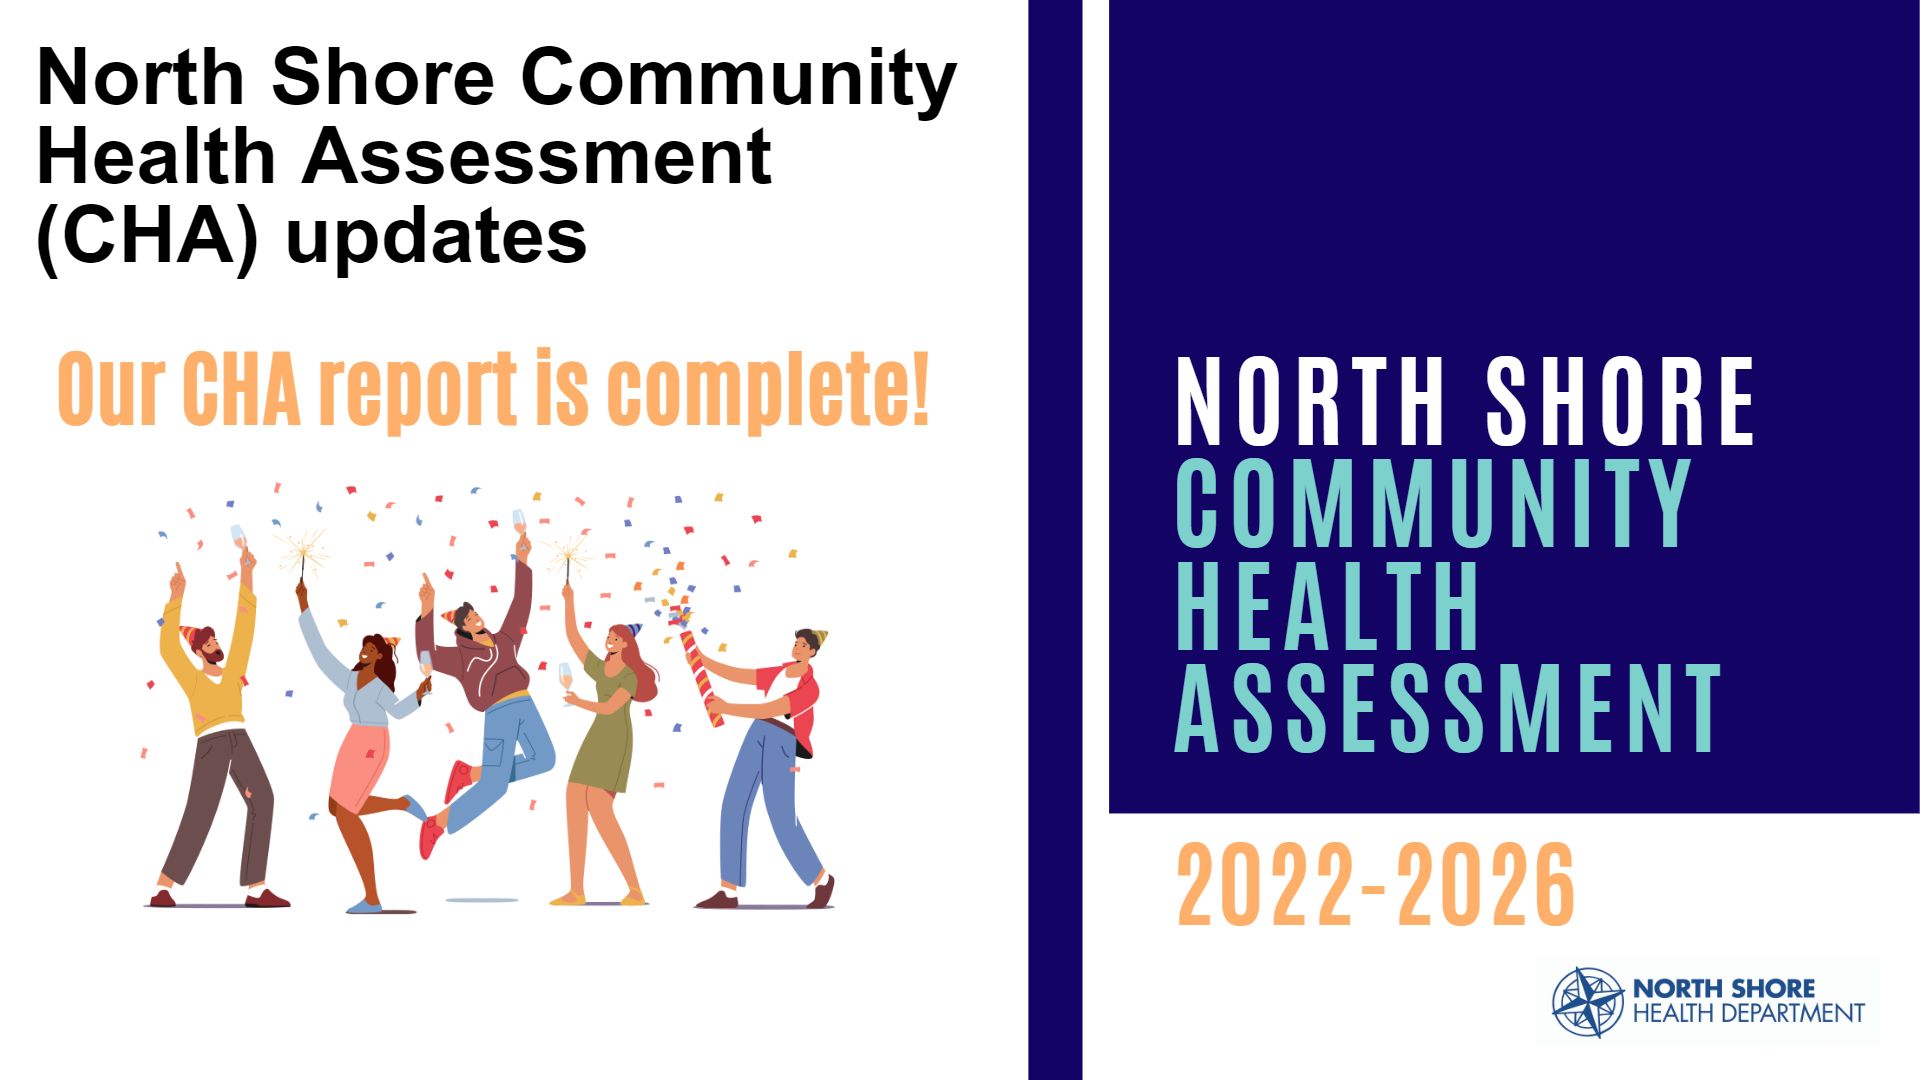 Assessments and Community Assessments